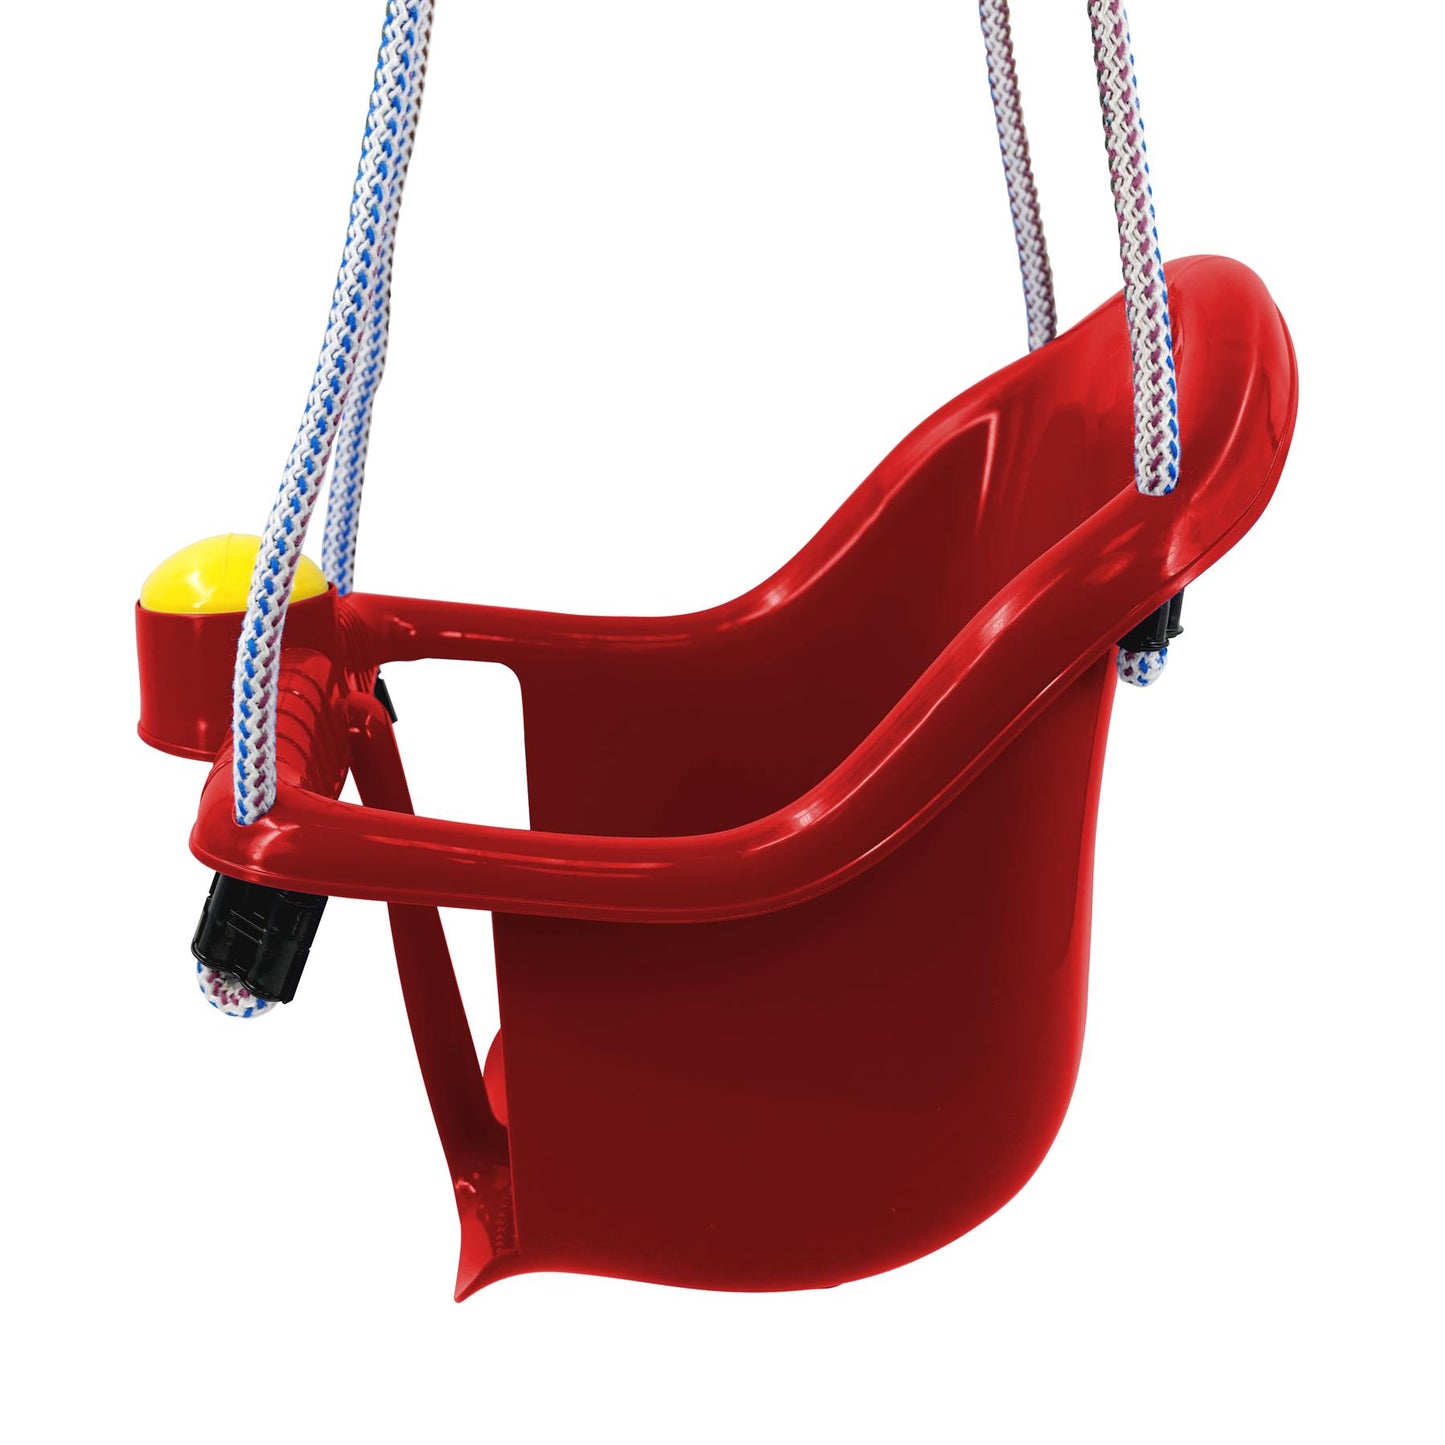 Red Children's Safety Swing Seat by MTS - UKBuyZone